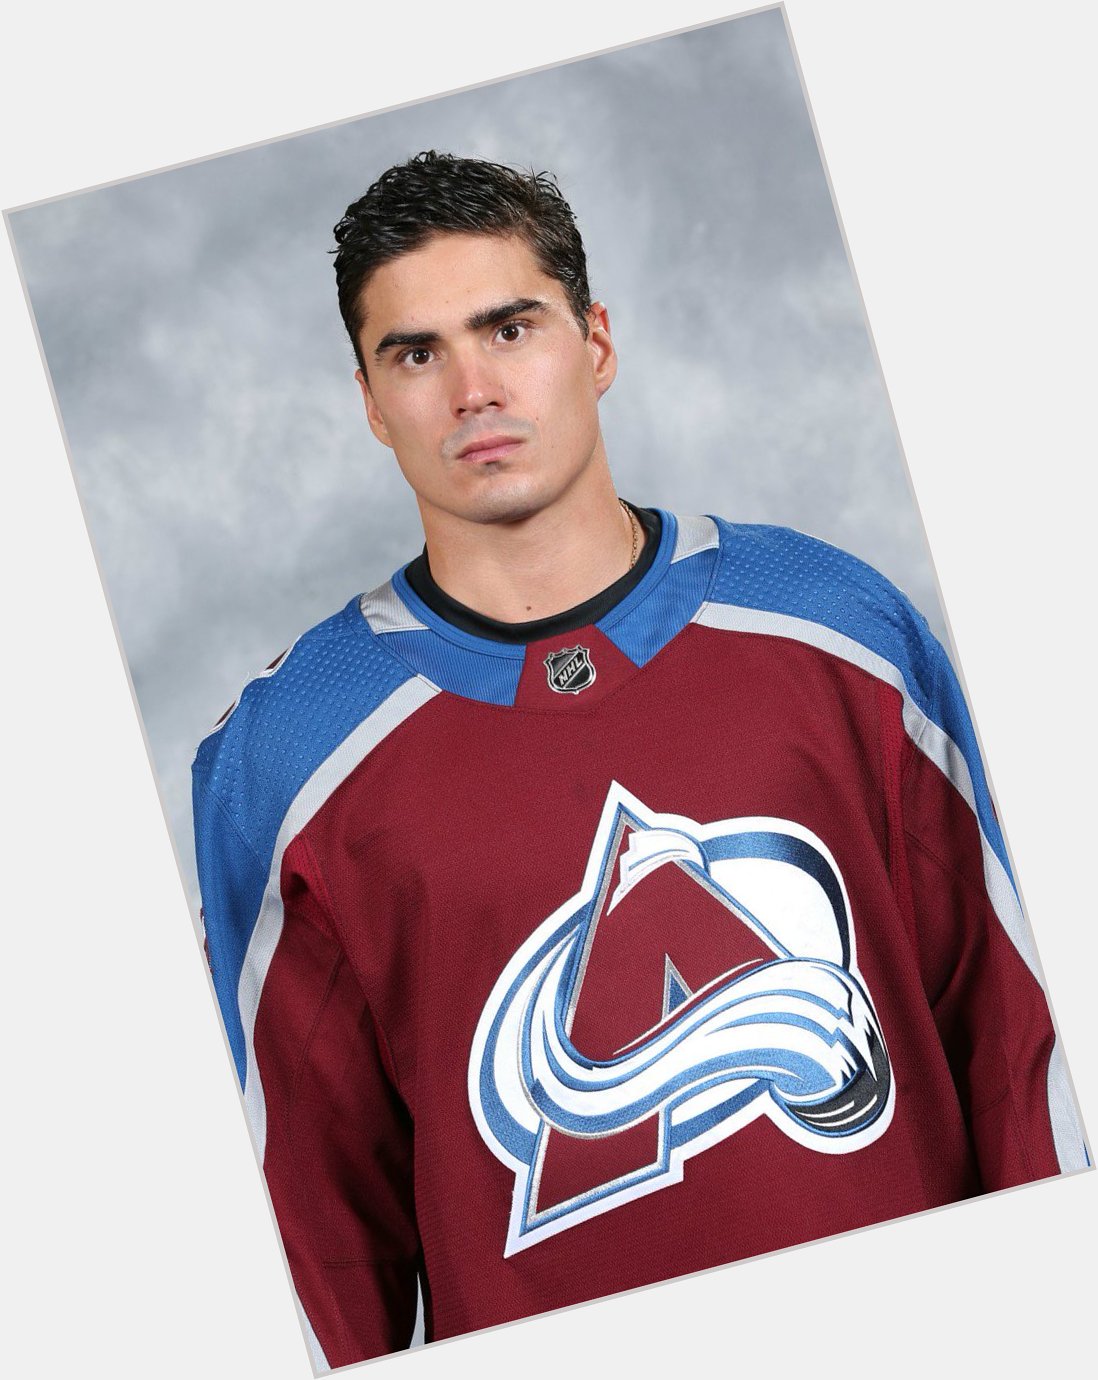 It\s your birthday, Nail Yakupov. Don\t look so serious! (Also, happy birthday, Yak Attack!) 